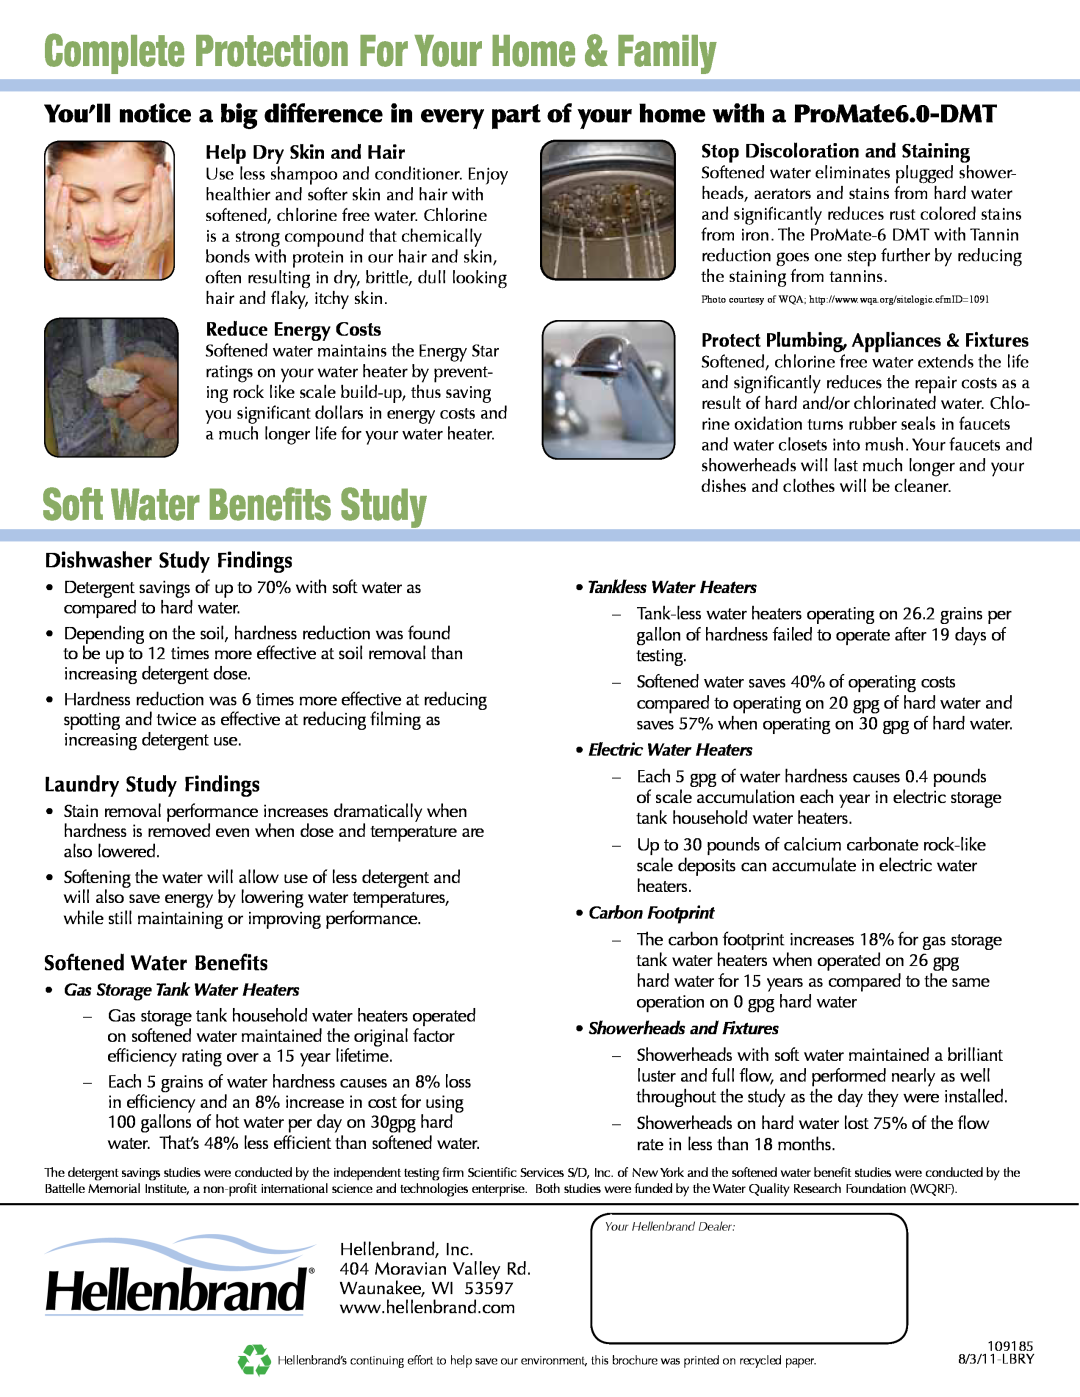 Hellenbrand 6.0-DMT manual Complete Protection For Your Home & Family, Soft Water Benefits Study, Dishwasher Study Findings 